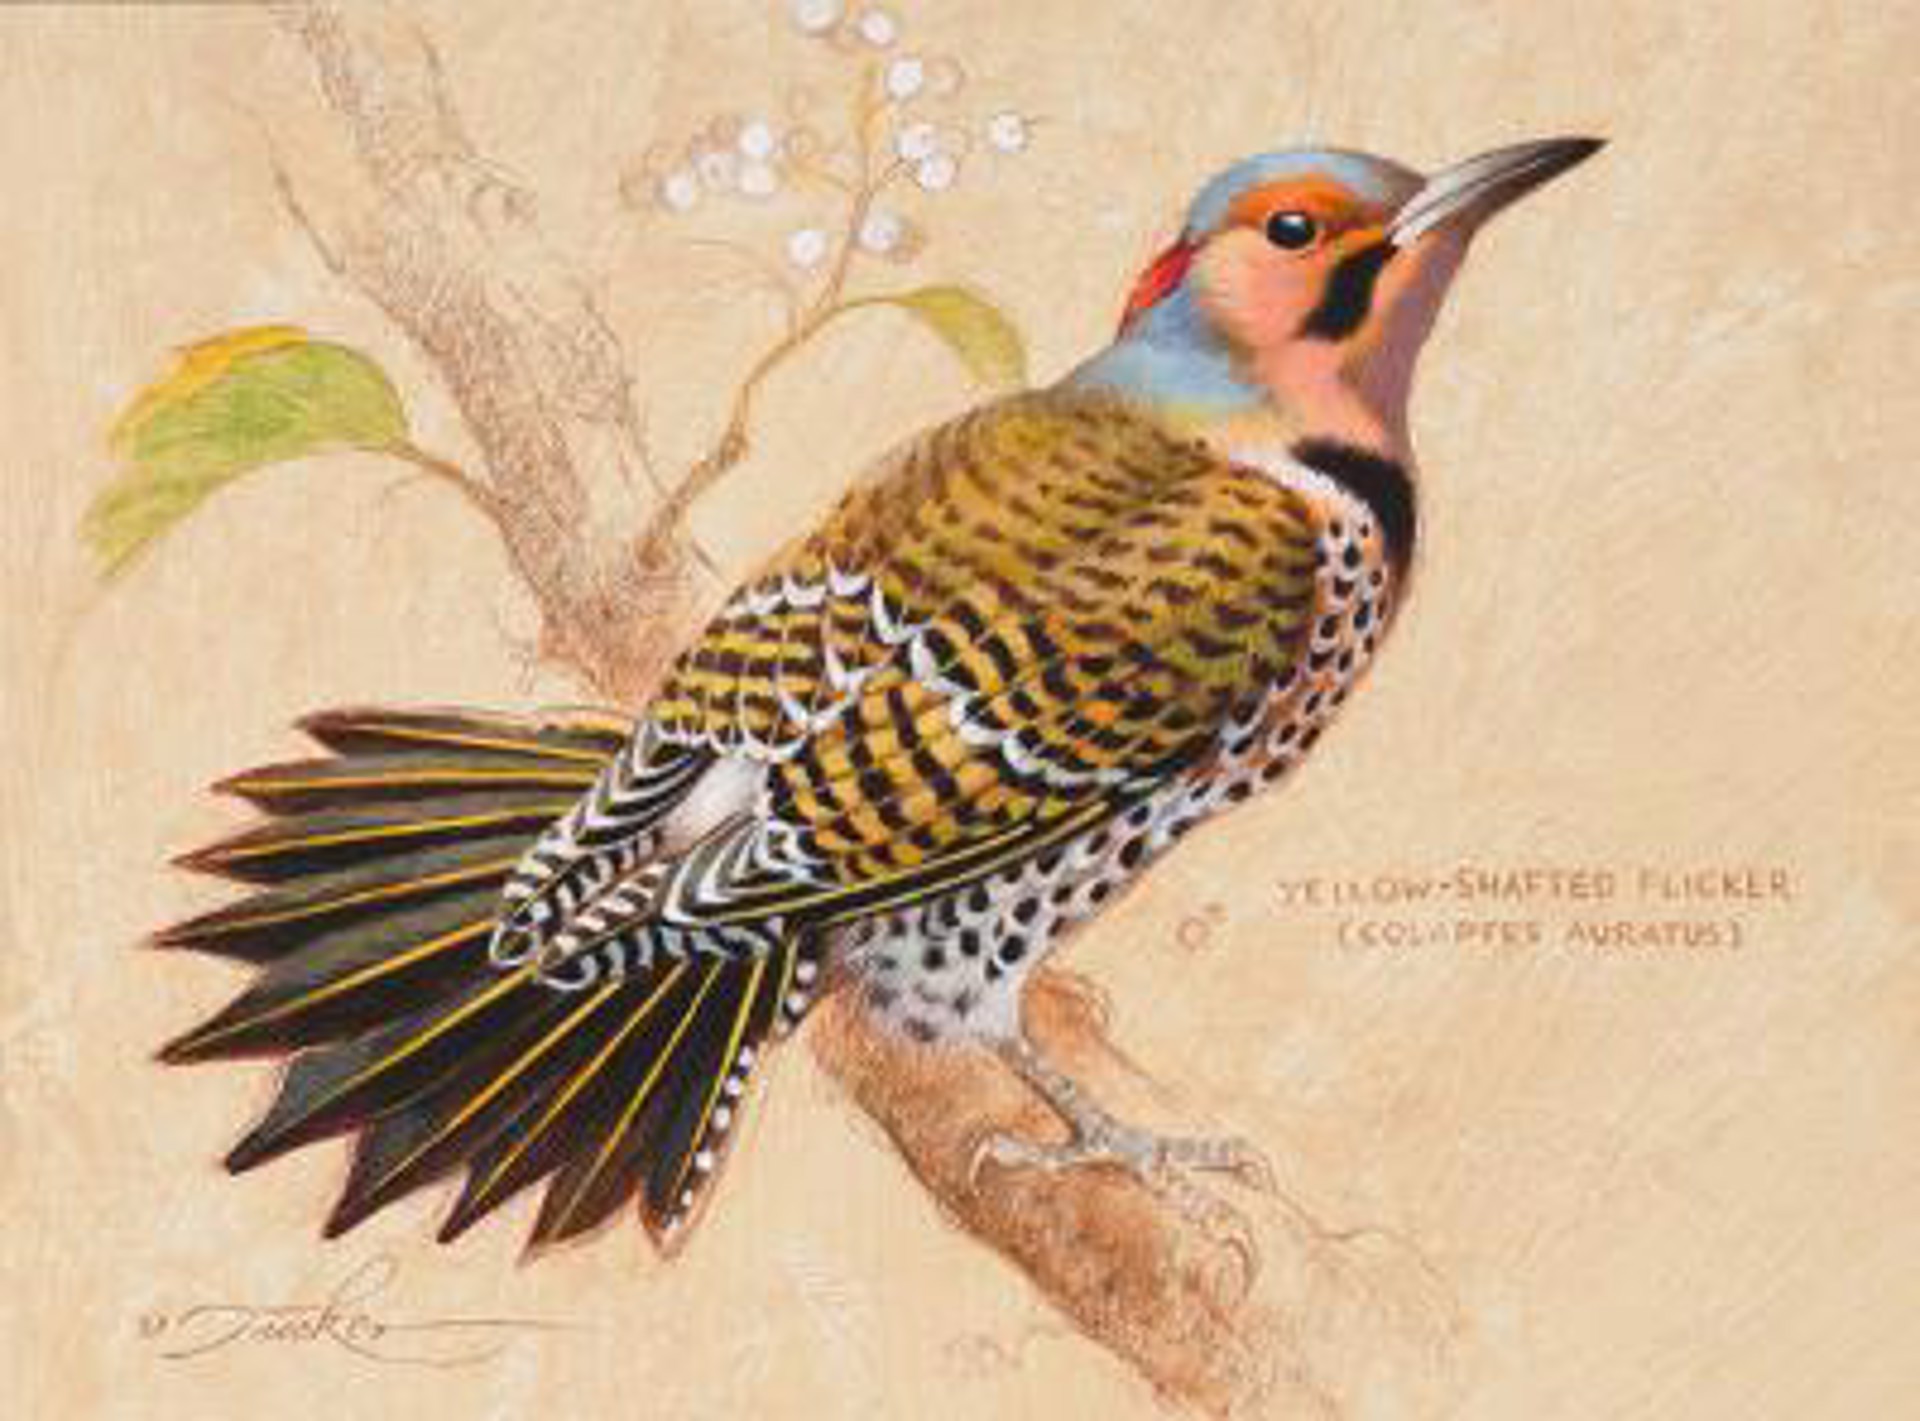 Yellow-Shafted Flicker #2 by Ezra Tucker